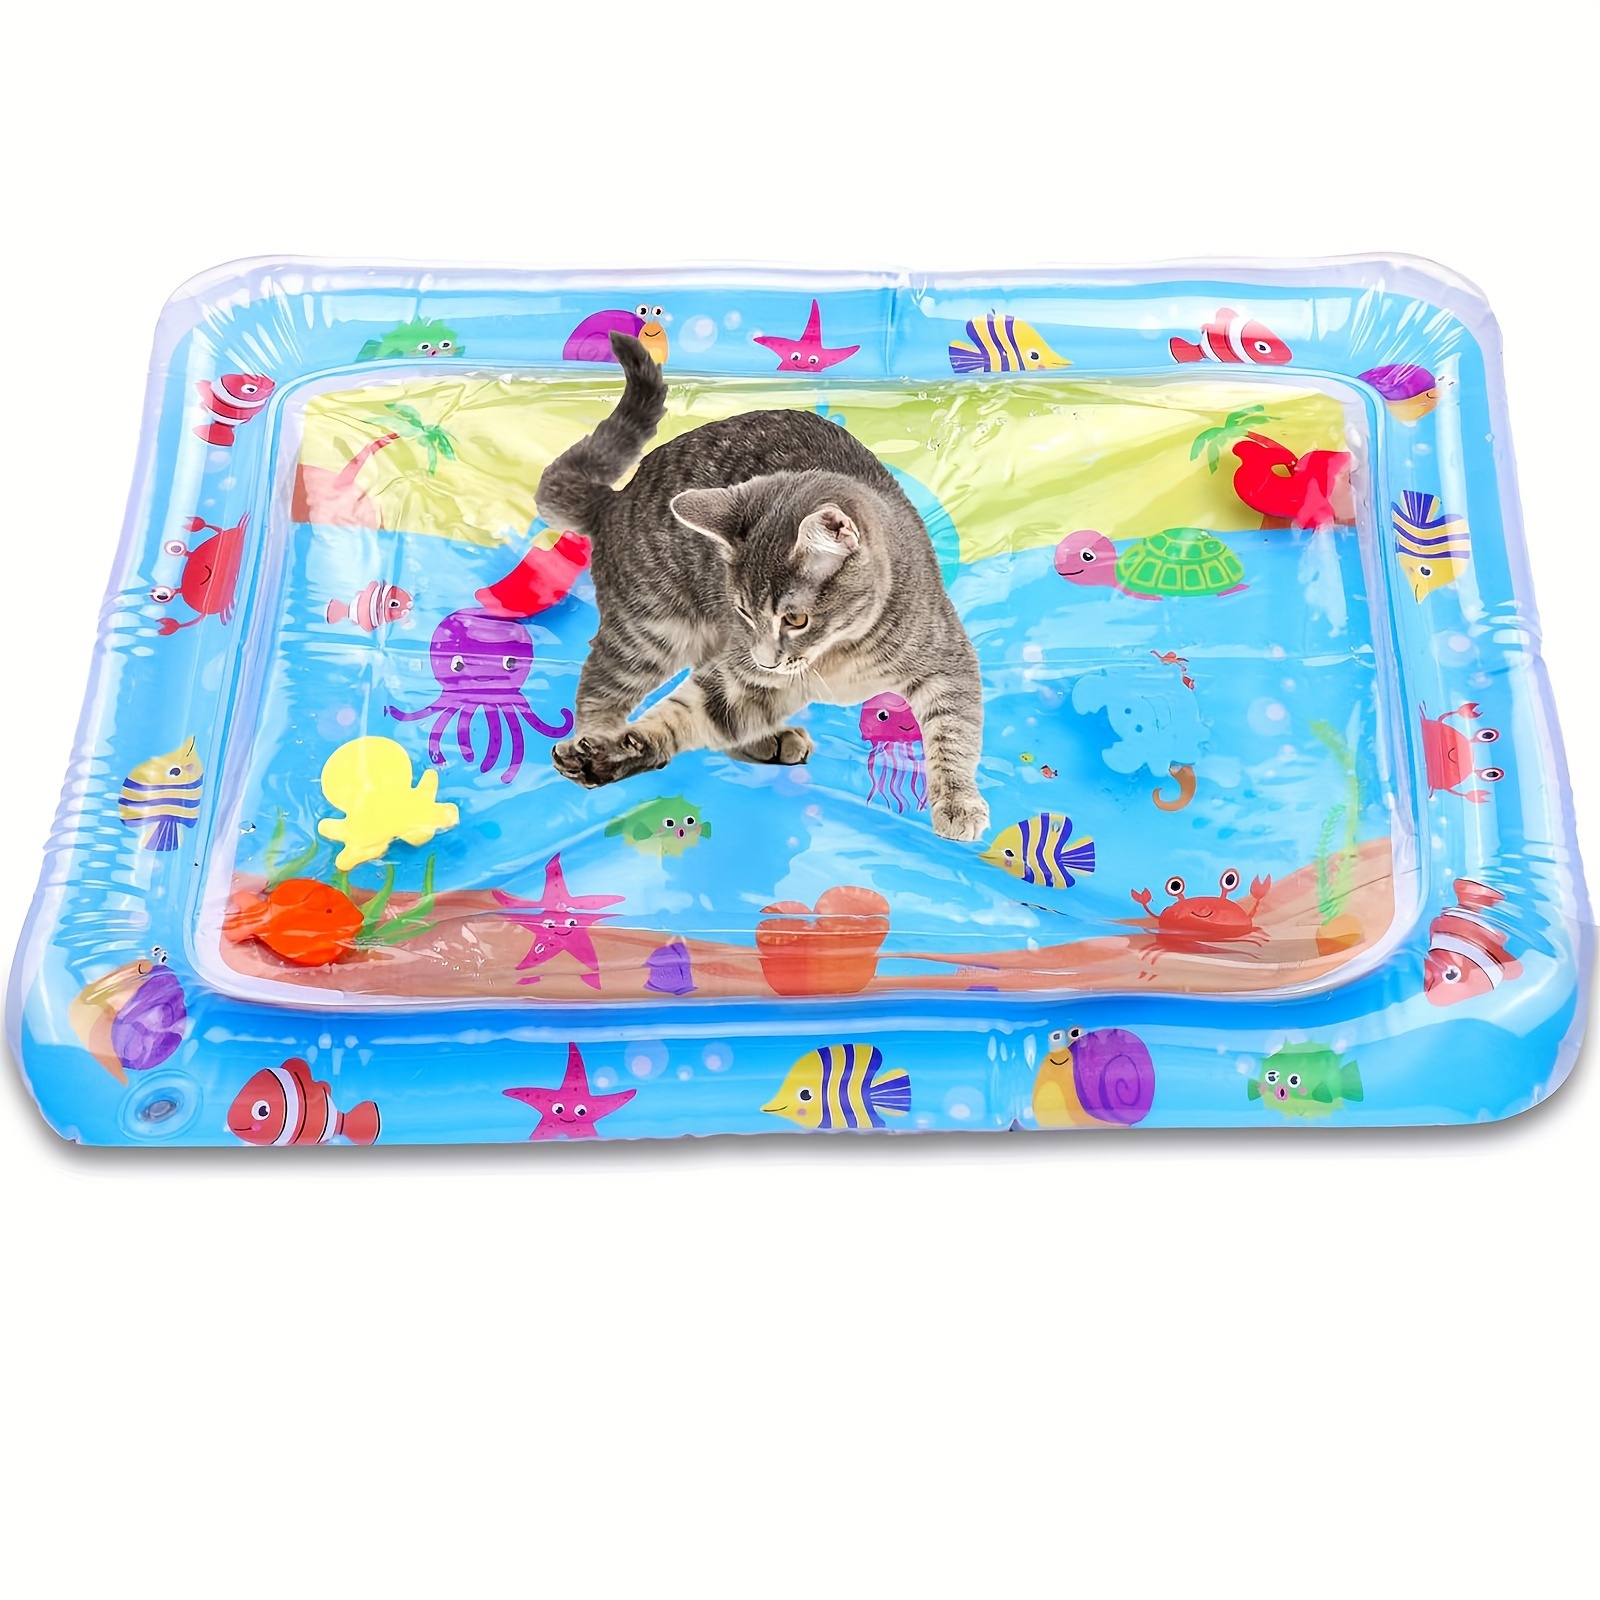 

Deluxe Thick Water Play Mat For Cats - Upgraded, Non-electric Pvc Cat Toy With Ocean Motifs For Indoor Fun